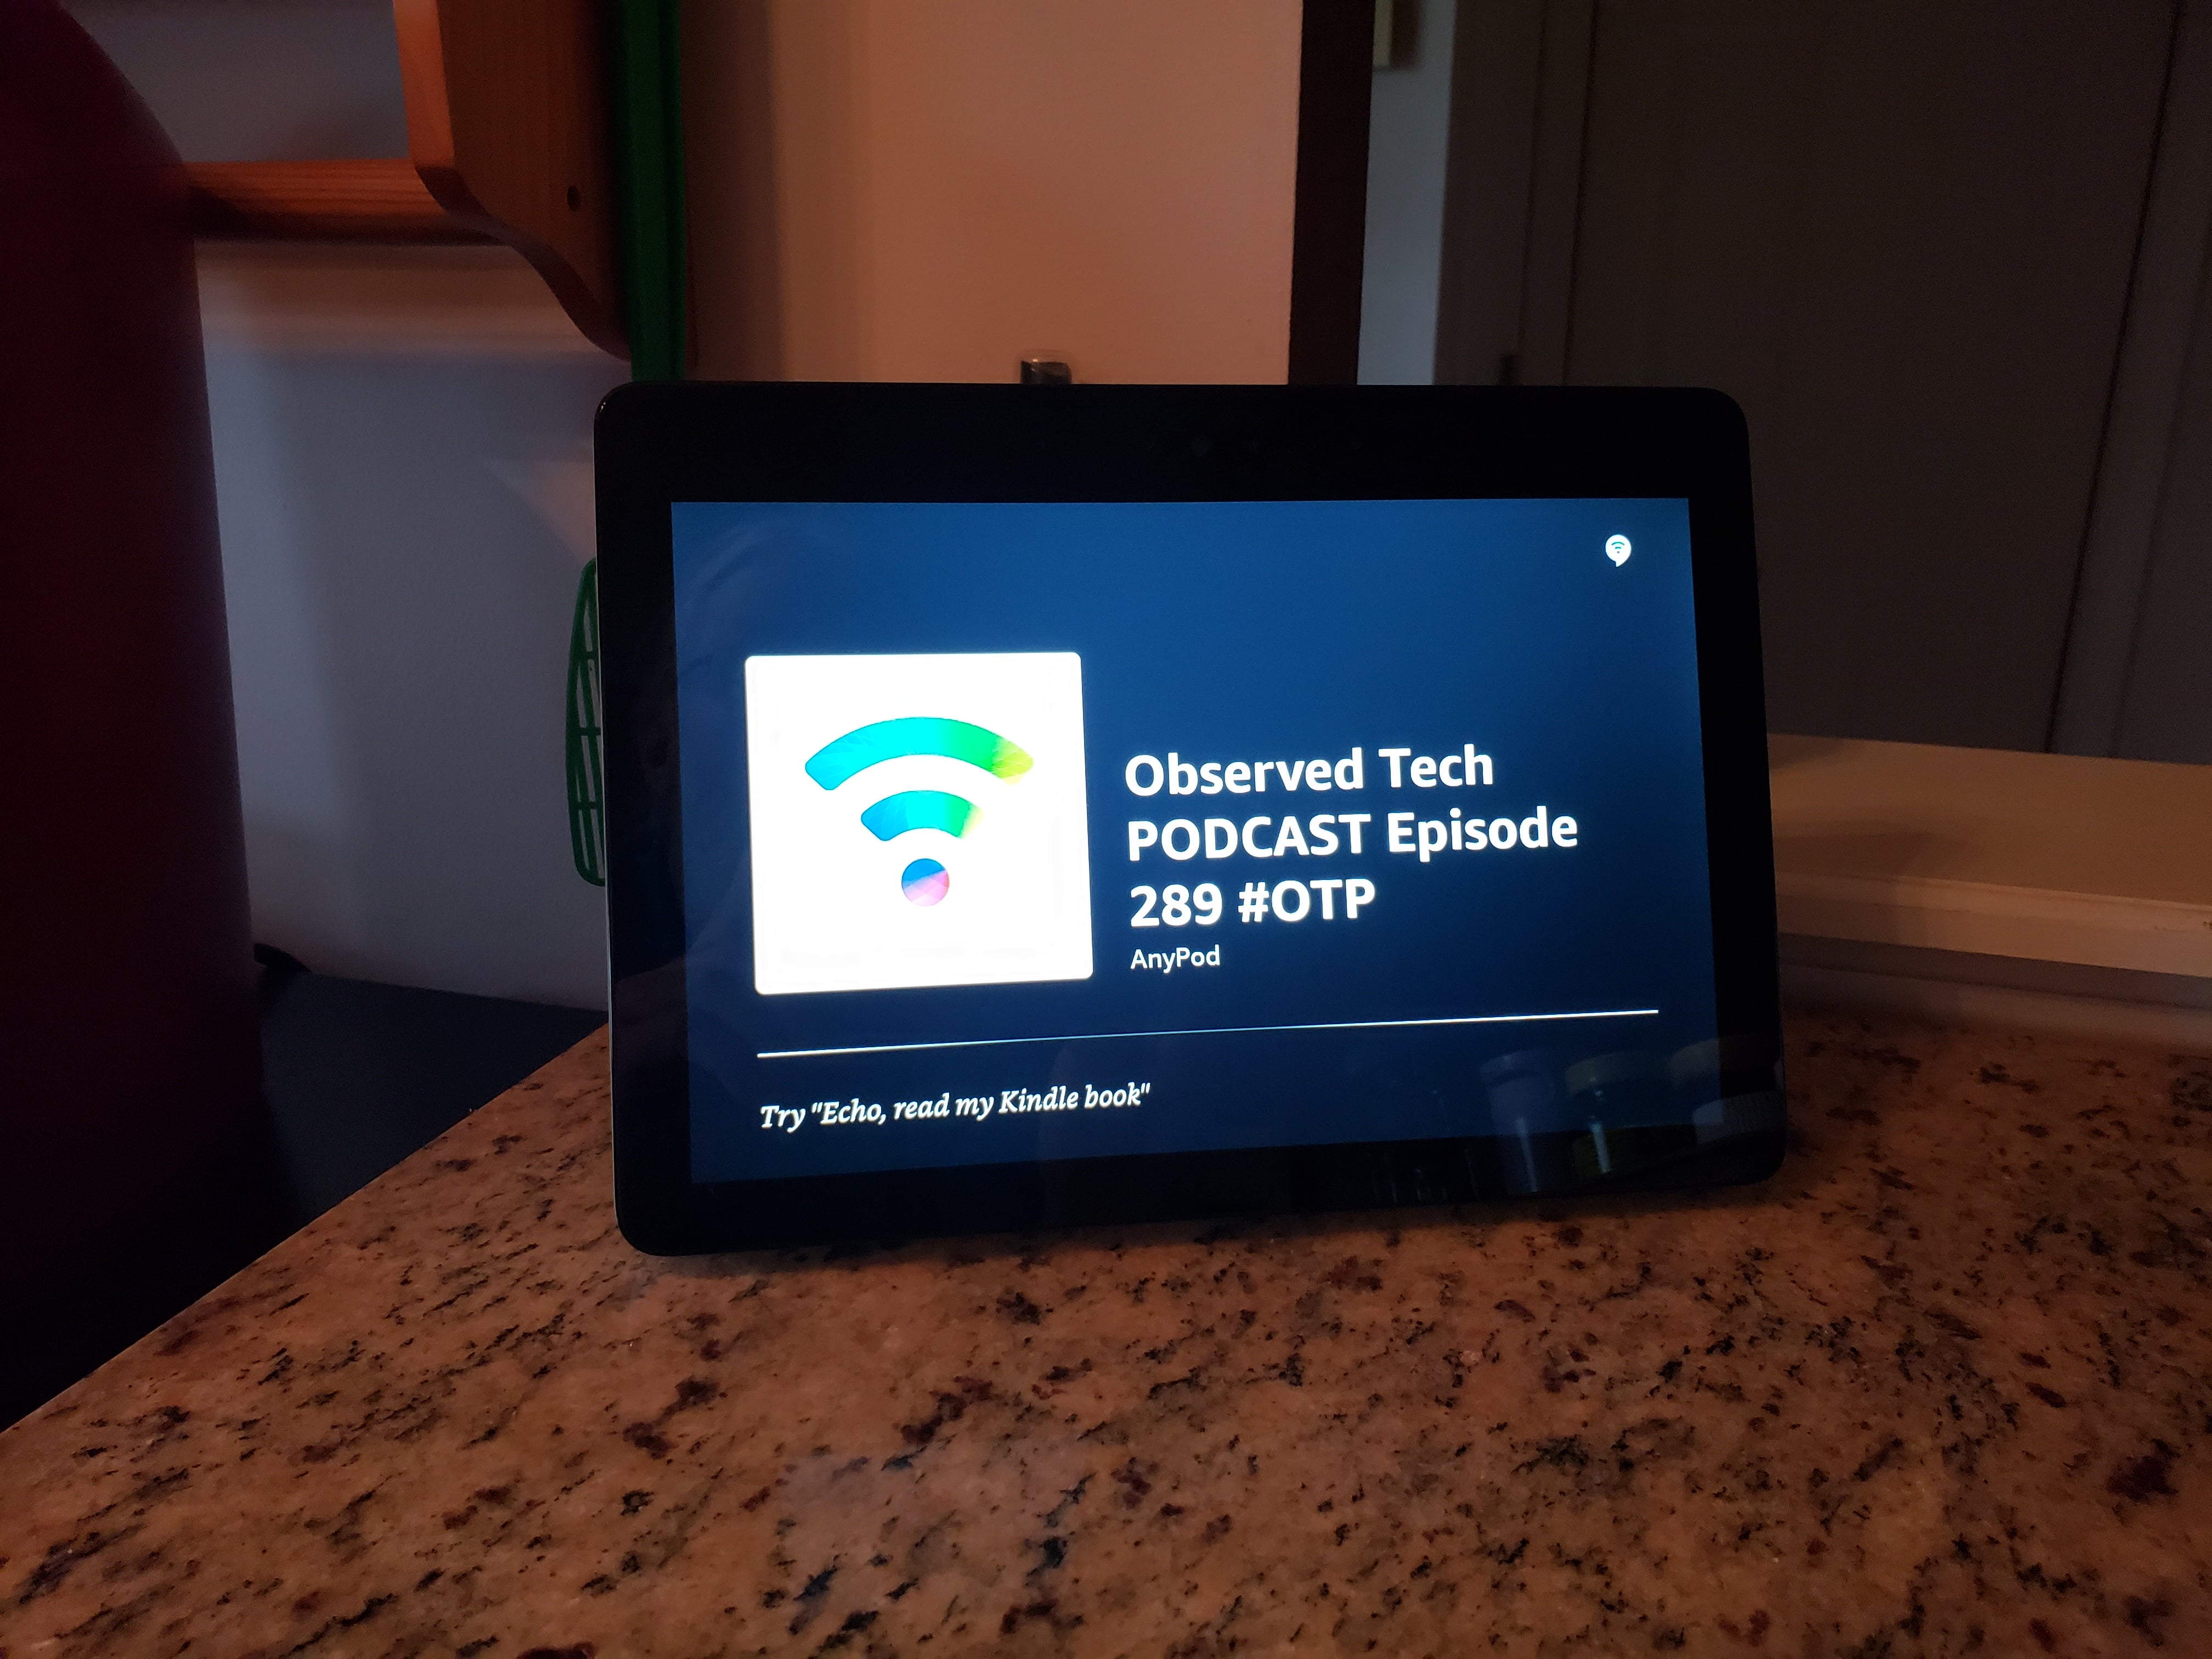 Observed Tech PODCAST on Amazon Echo Show